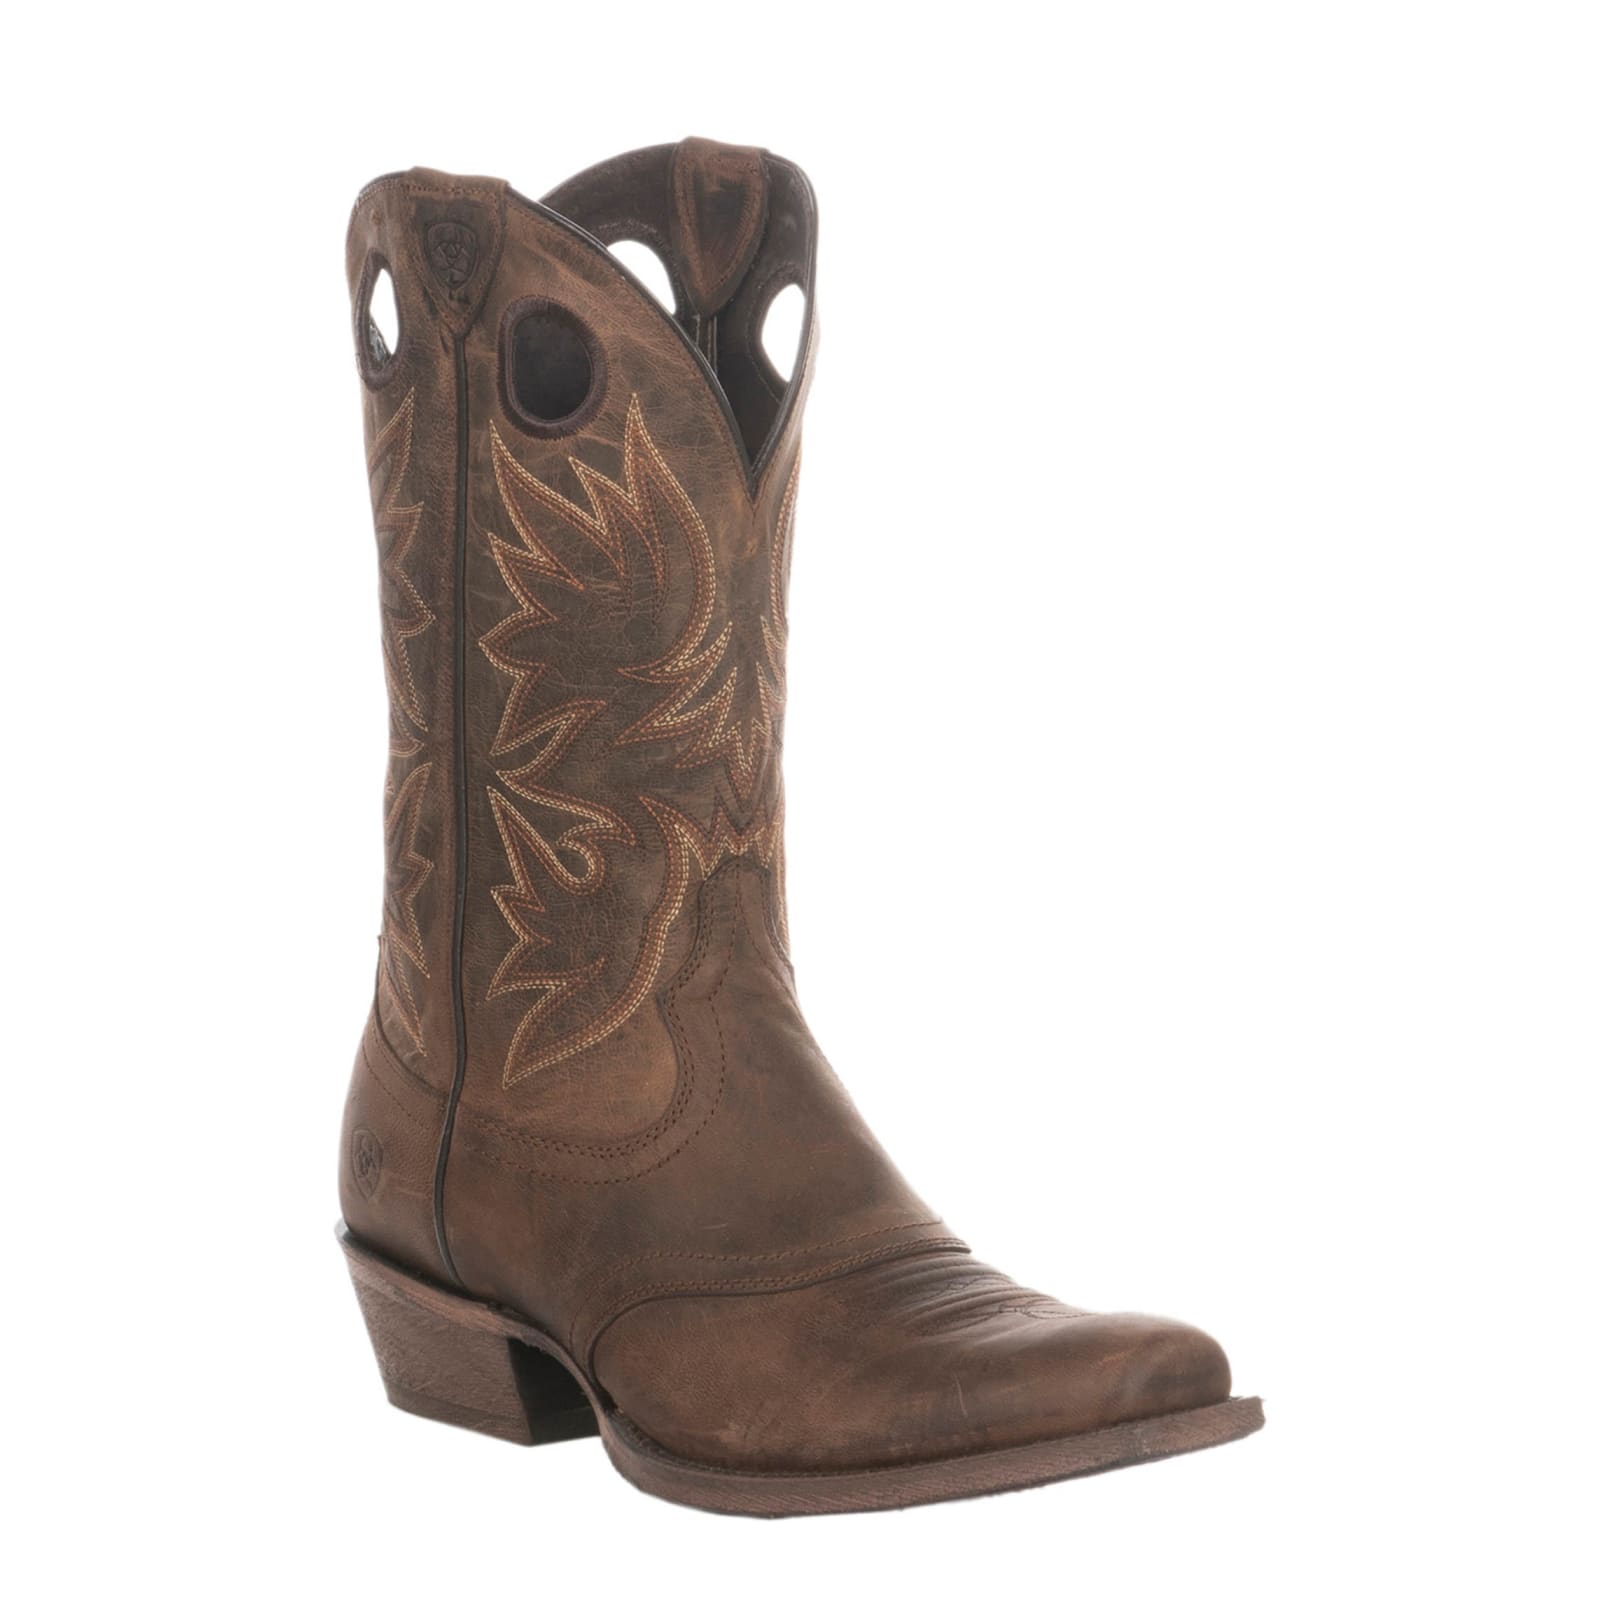 How Much is Ariat Worth?